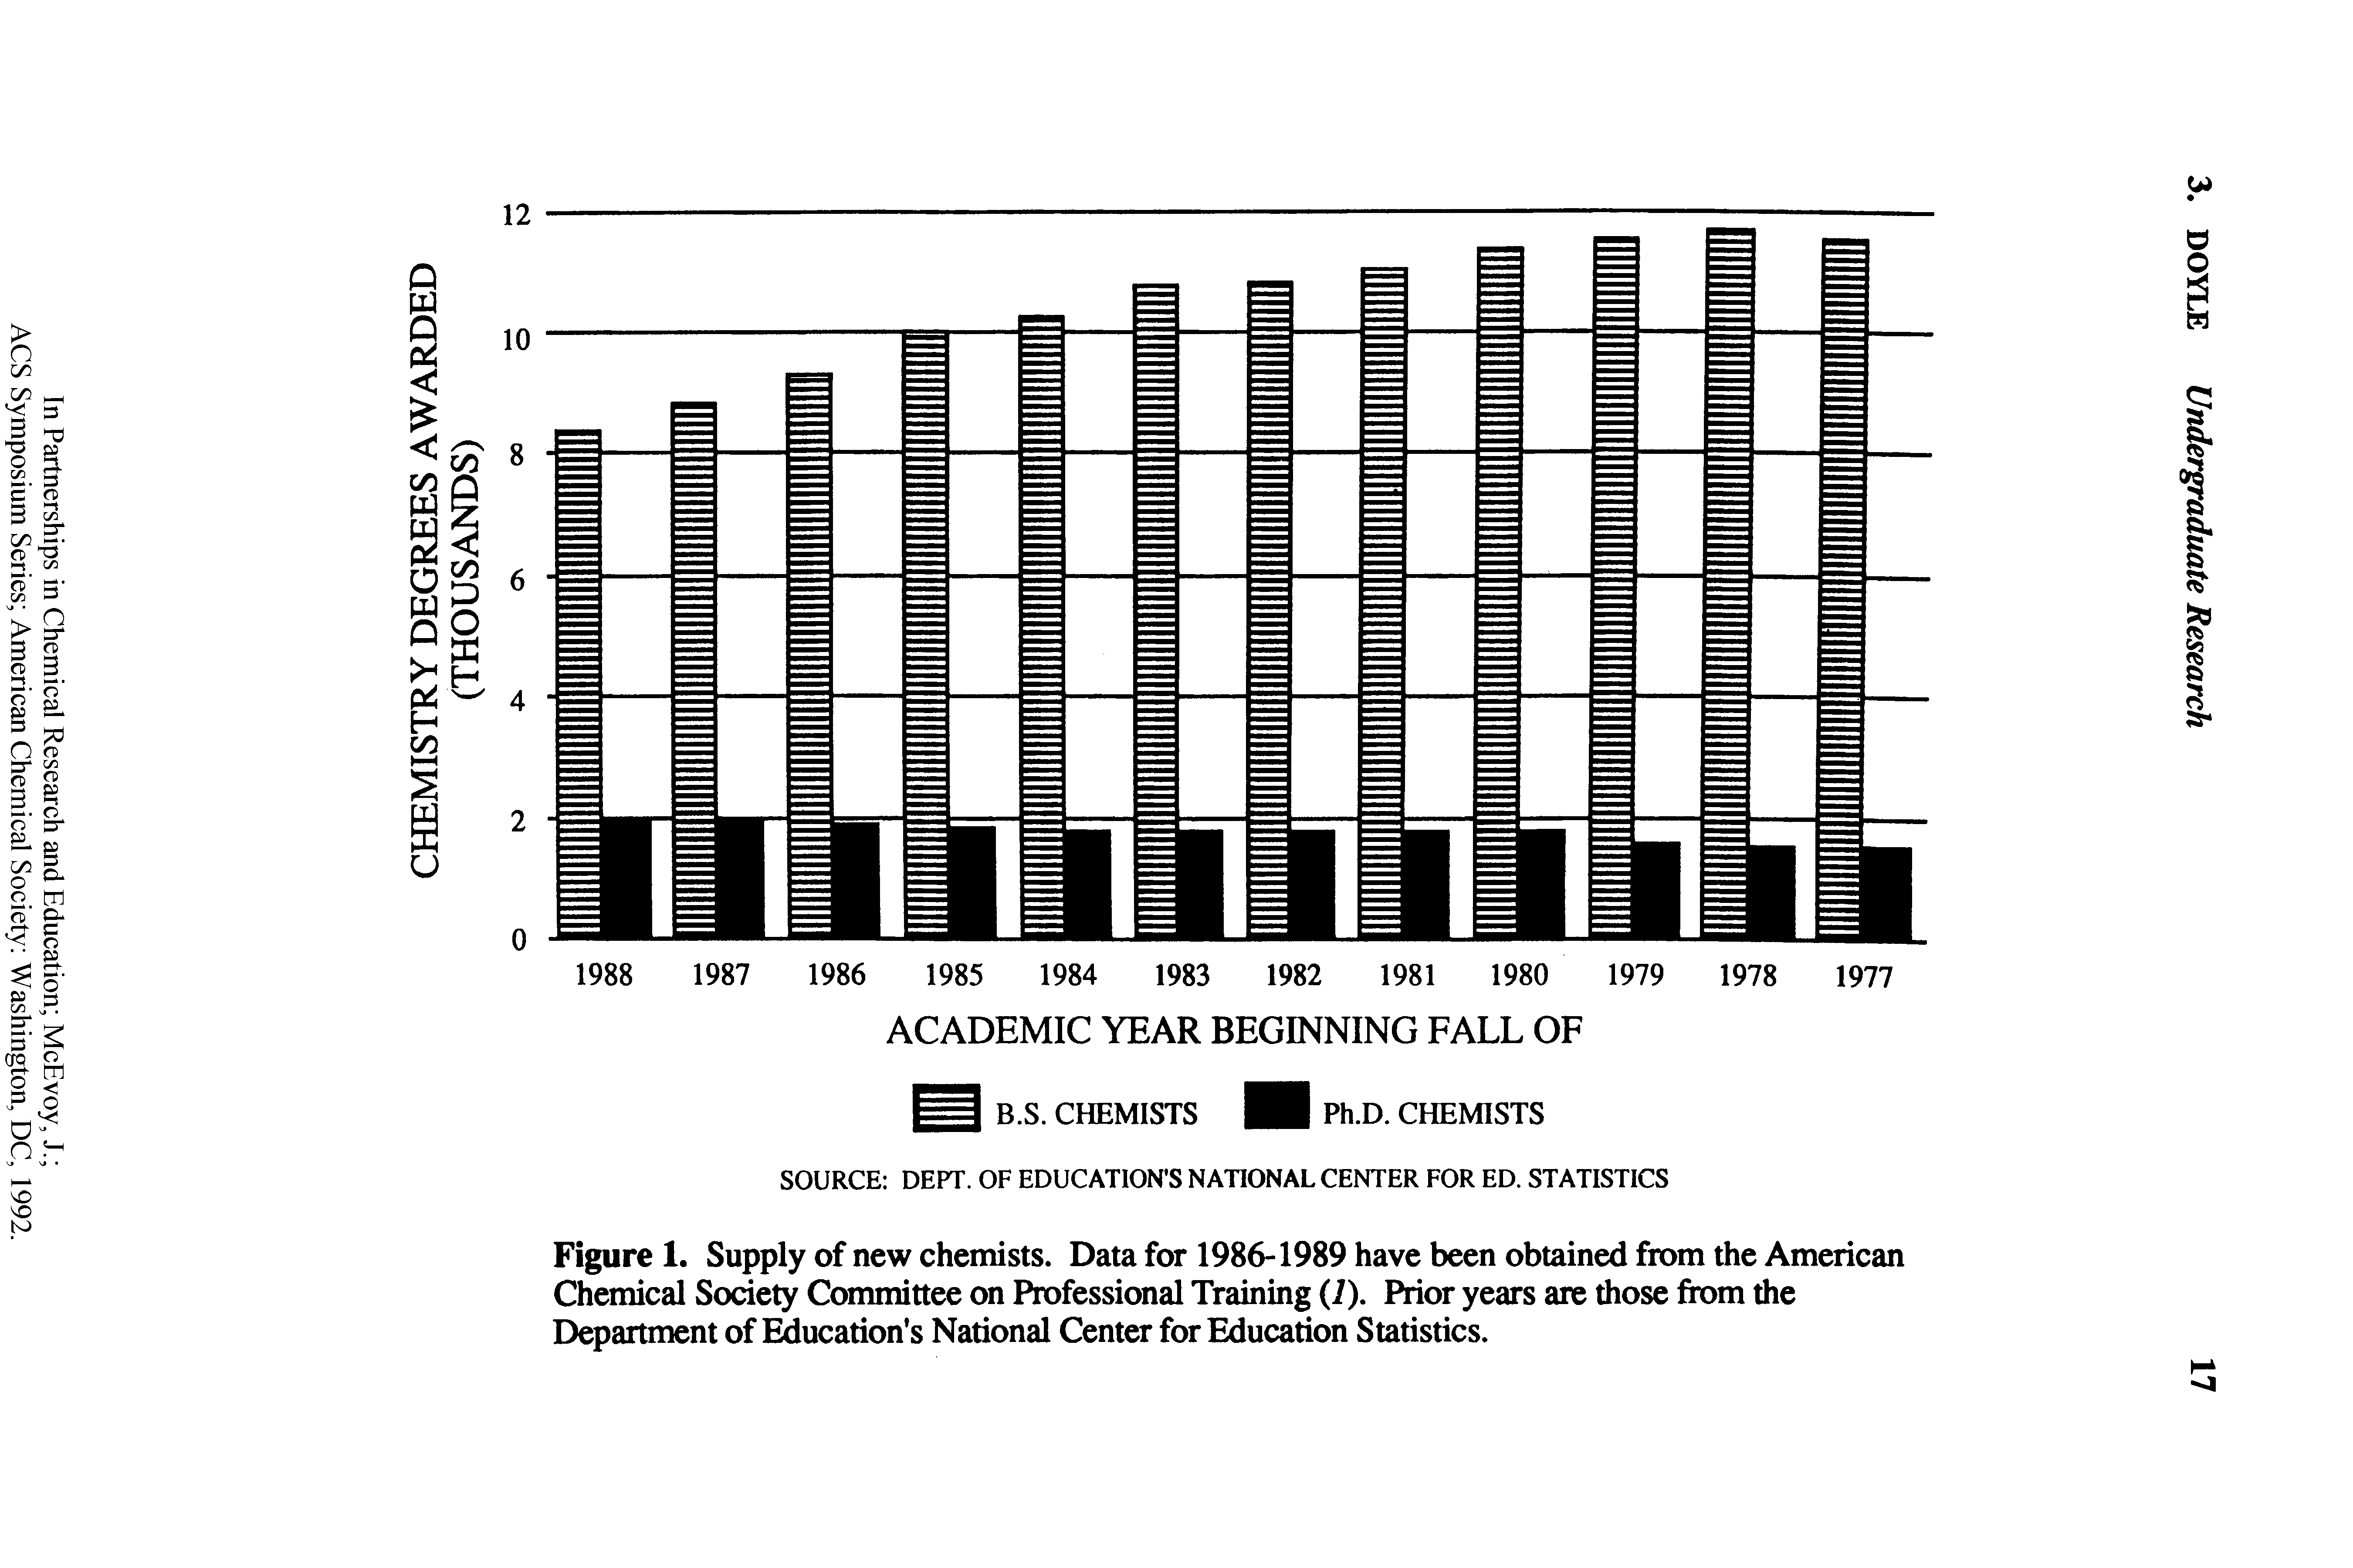 Figure 1. Supply of new chemists. Data for 1986-1989 have been obtained from the American Chemical Society Committee on Professional Training (i). Prior years are those from the Department of Education s National Center for Education Statistics.